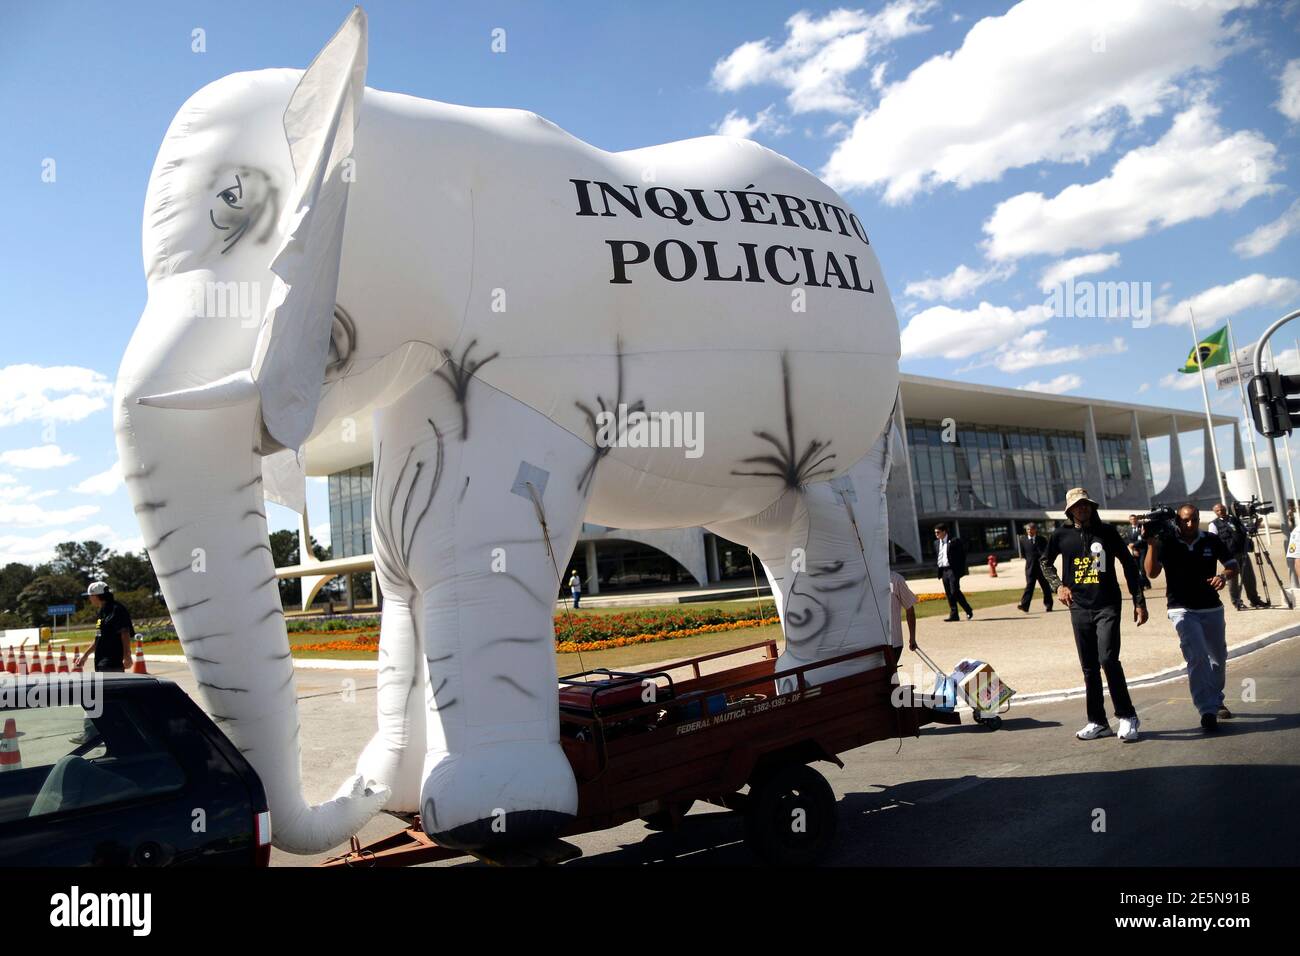 Federal police walk with an inflatable elephant to represent what they say is slowness in police investigation procedures during the 'March for Reform of the Federal Police' in front of Planalto Palace in Brasilia July 16, 2013. The protesters demanded changes in the structure and modernization of criminal investigations. REUTERS/Ueslei Marcelino (BRAZIL - Tags: BUSINESS EMPLOYMENT CRIME LAW CIVIL UNREST) Stock Photo